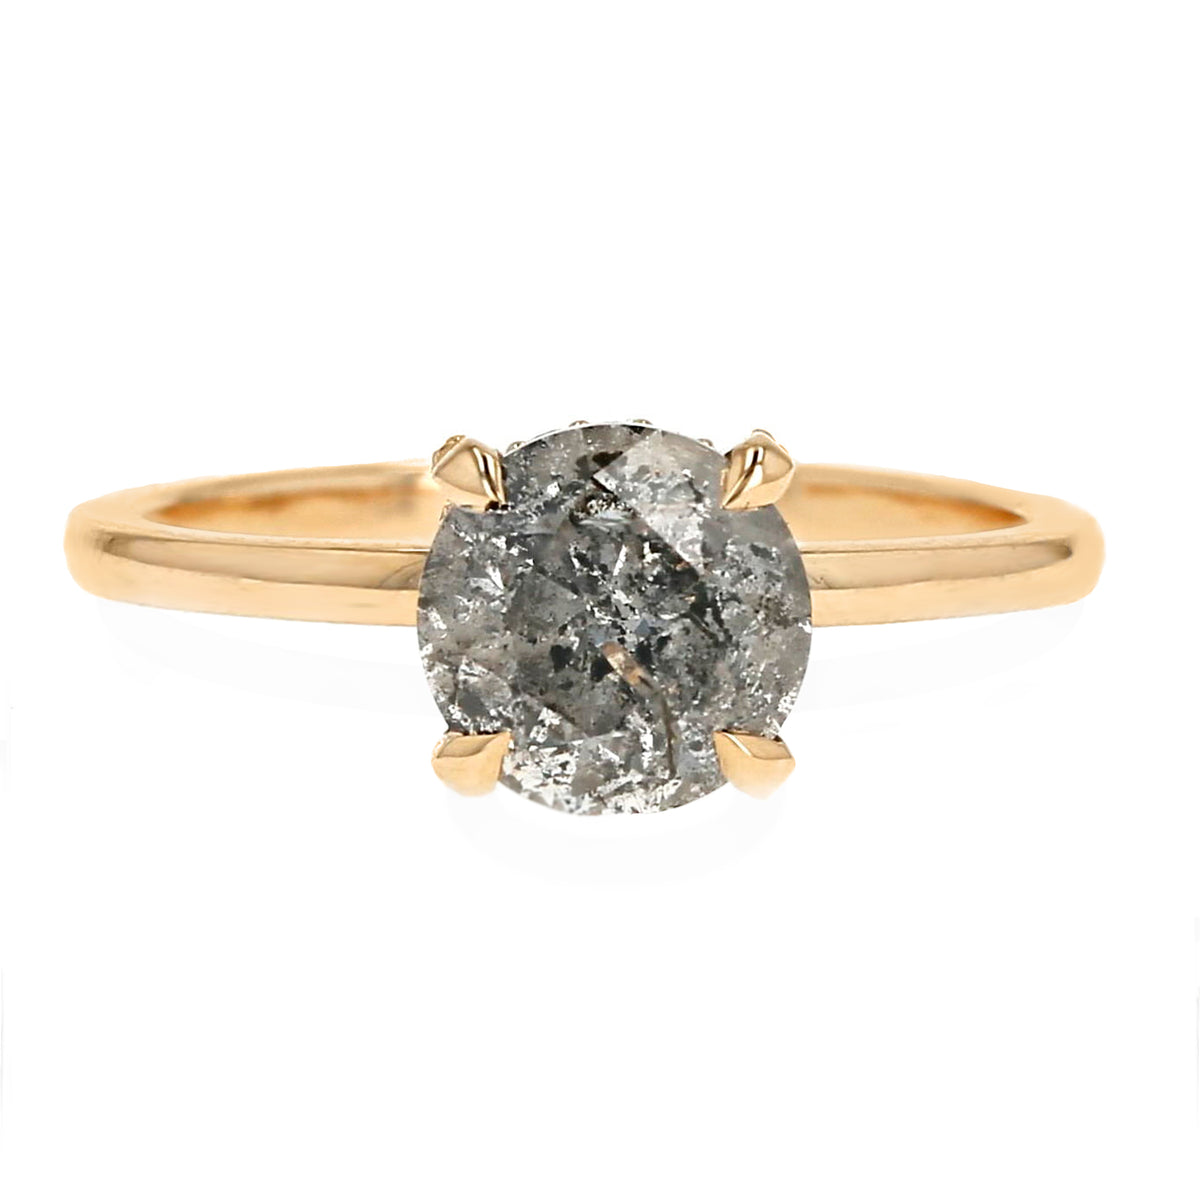 2.02ct round cut salt and pepper gray diamond solitaire engagement ring with hidden diamond halo 14k yellow gold